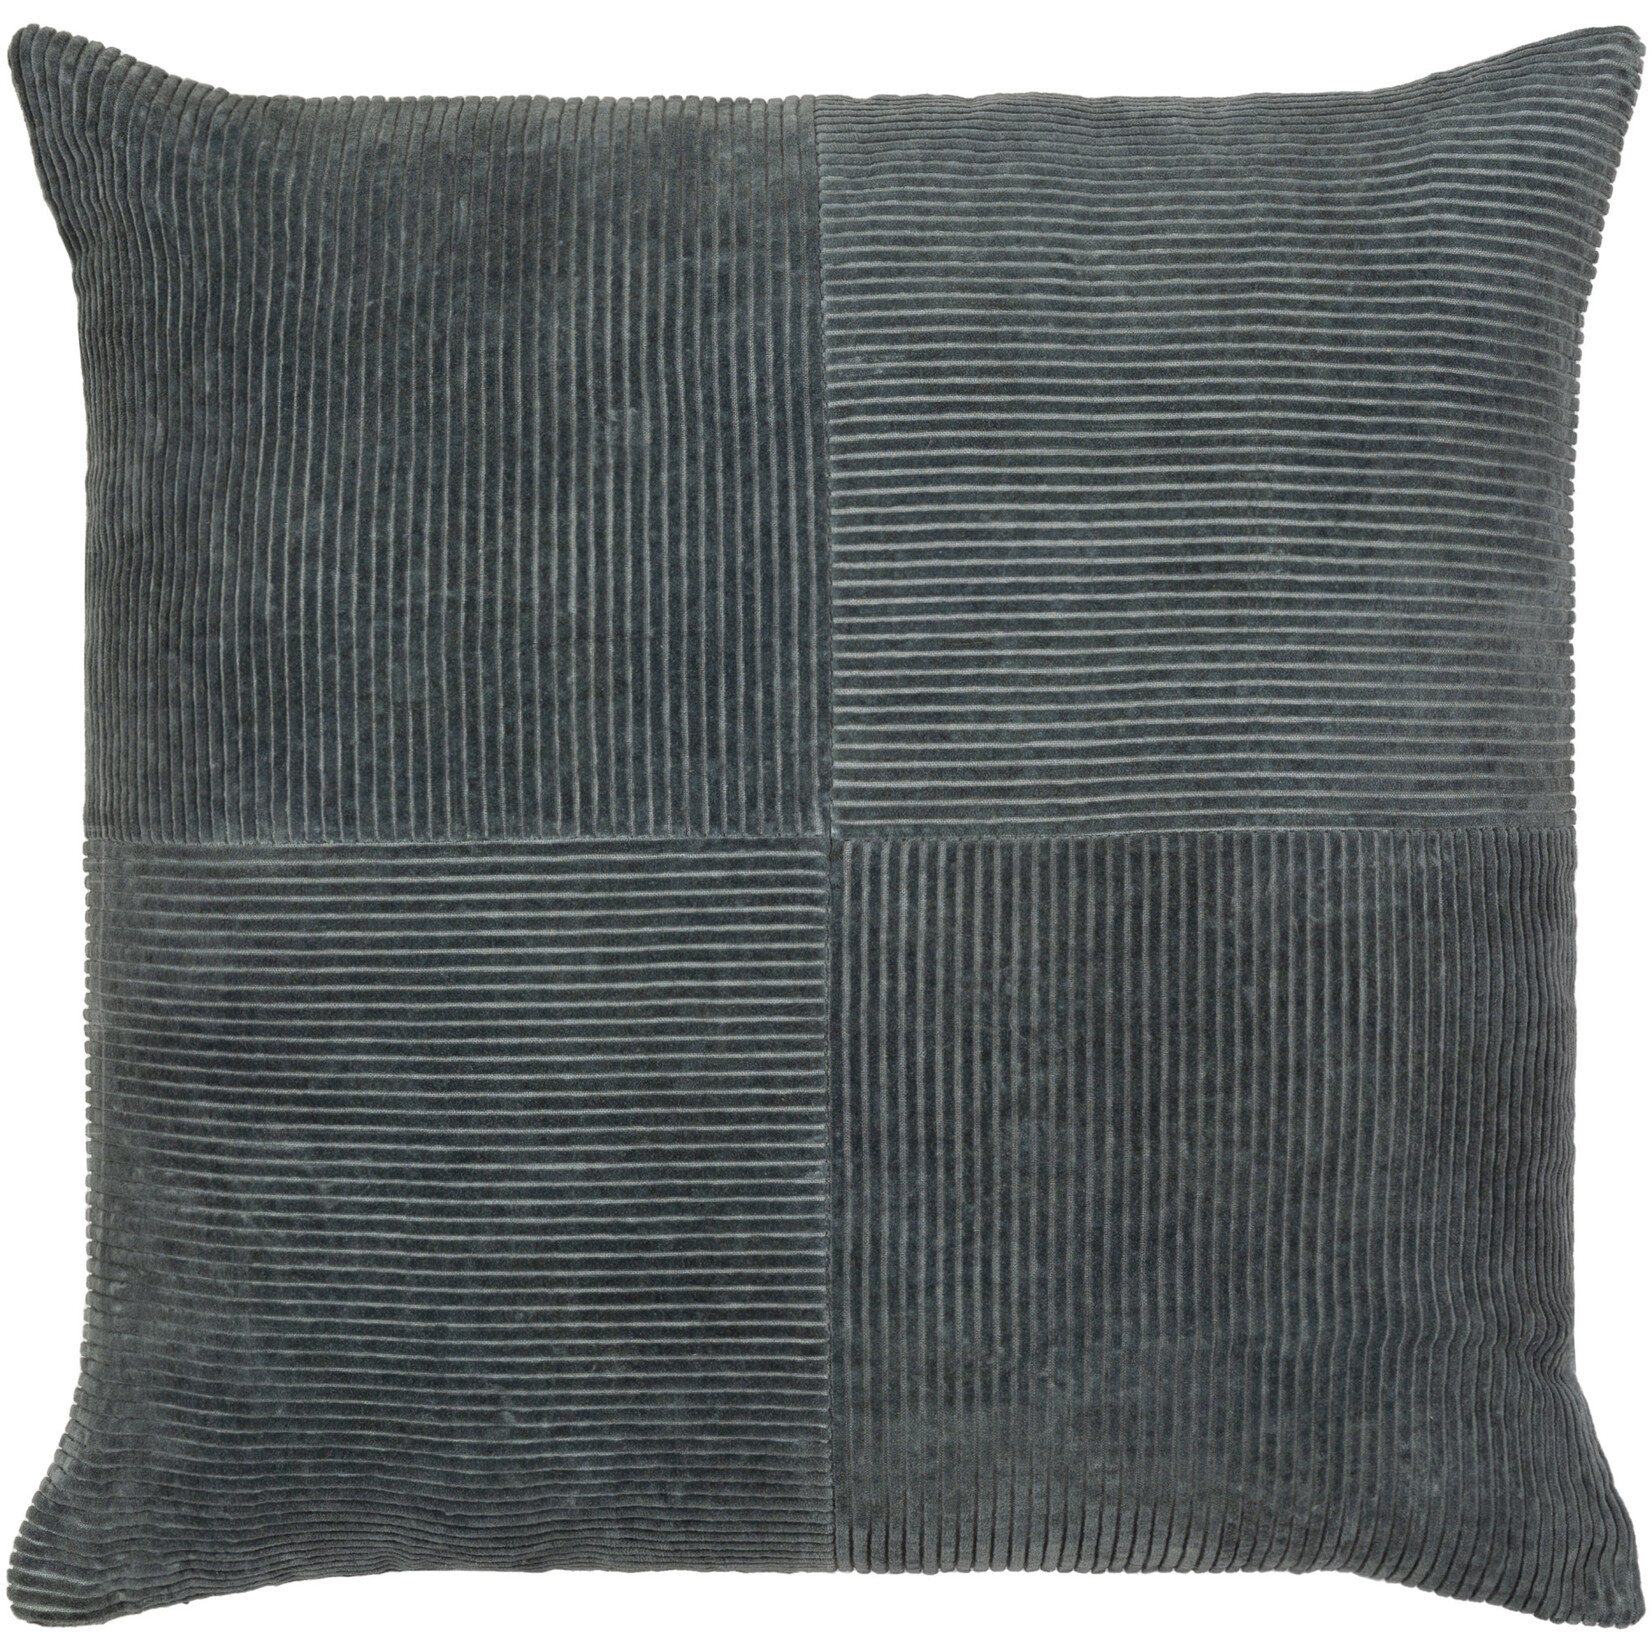 Surya CDQ002-1818P Accent Pillow 18x18